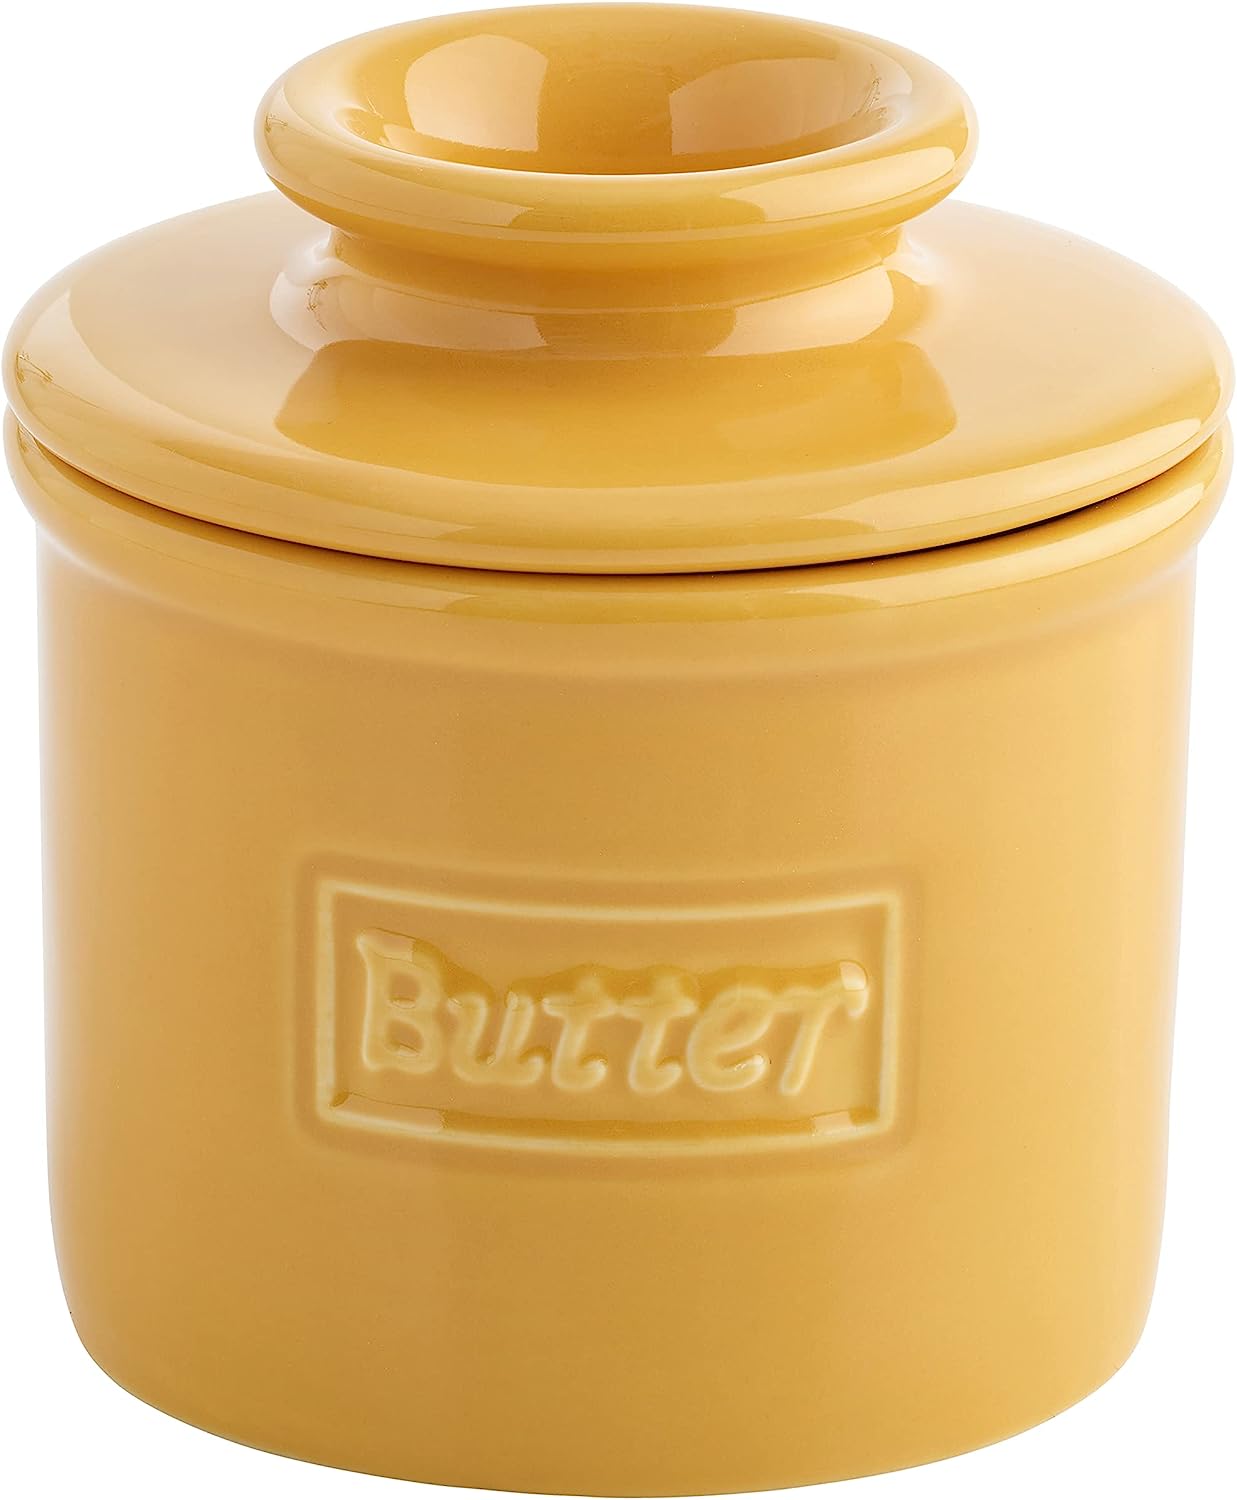 Butter Bell - The Original Butter Bell crock by L Tremain, a Countertop French Ceramic Butter Dish Keeper for Spreadable Butter, Café Retro Collection, Golden Yellow, Glossy Finish